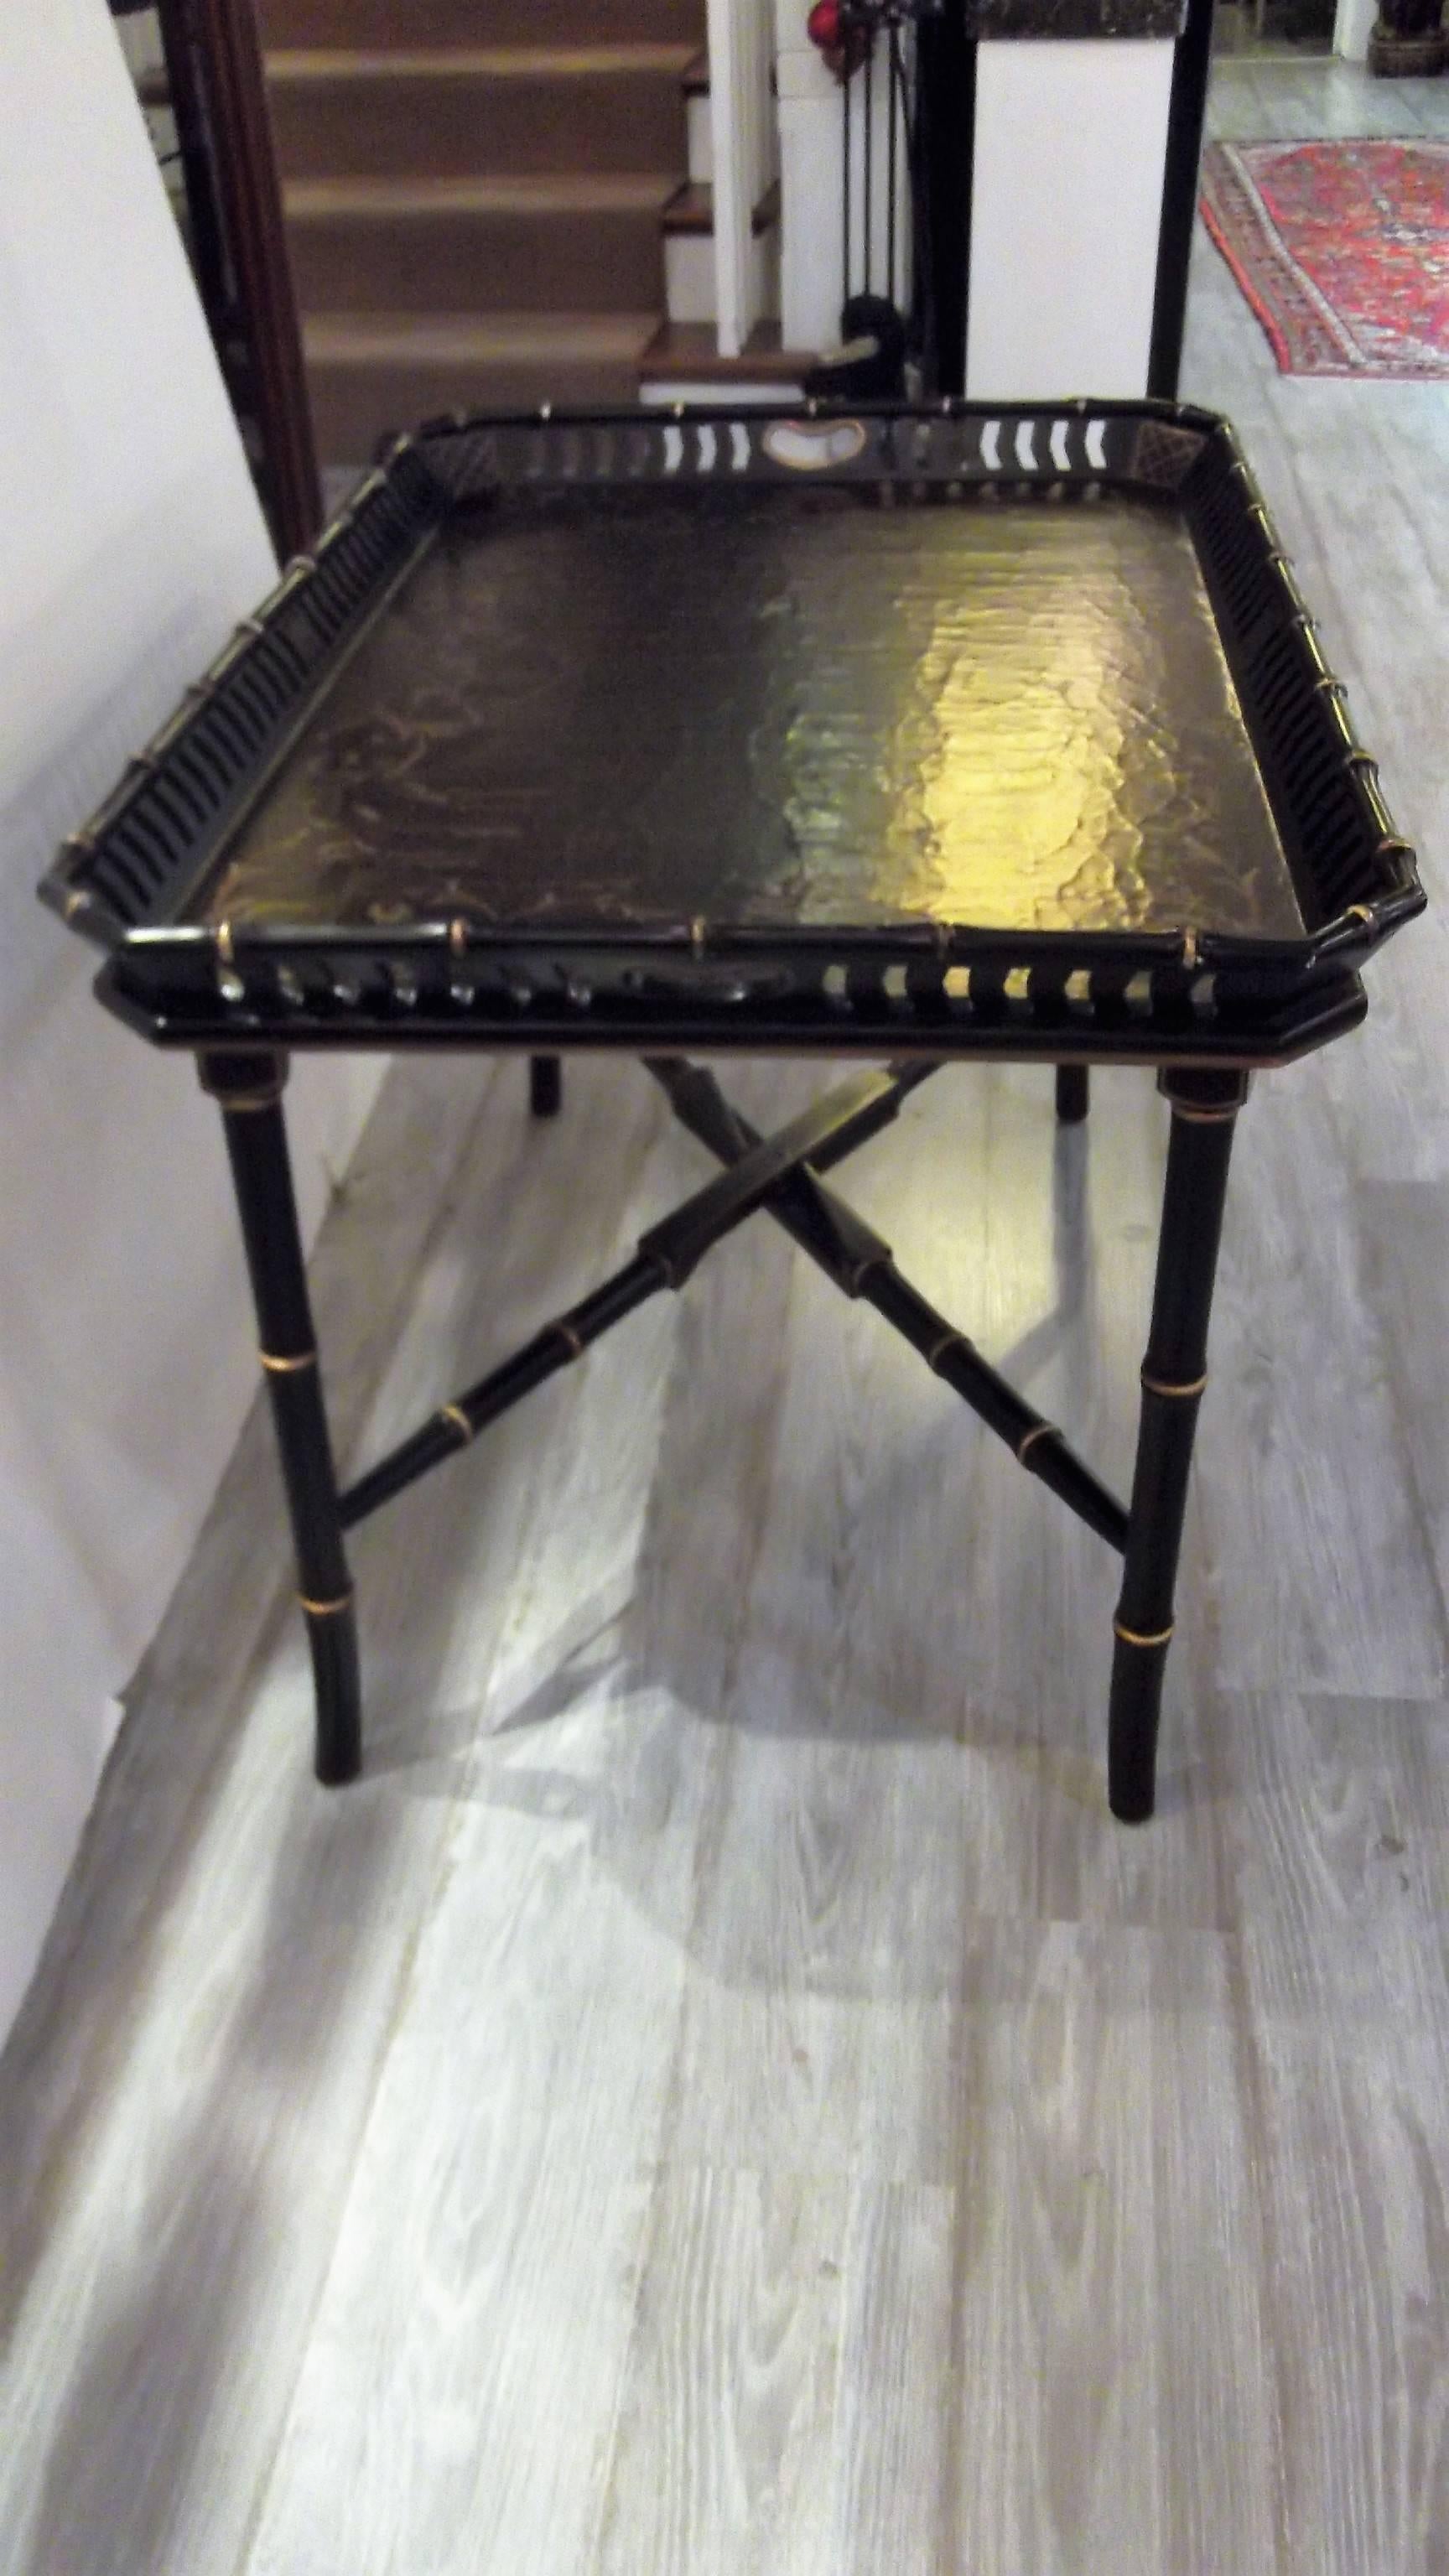 A decorator chinioserie tray top table with gilt highlights. The tray has a reticulated gallery with a bamboo motif edge. The top is finished in a crackled aged surface. The tray rests on a Regency style bamboo motif base.